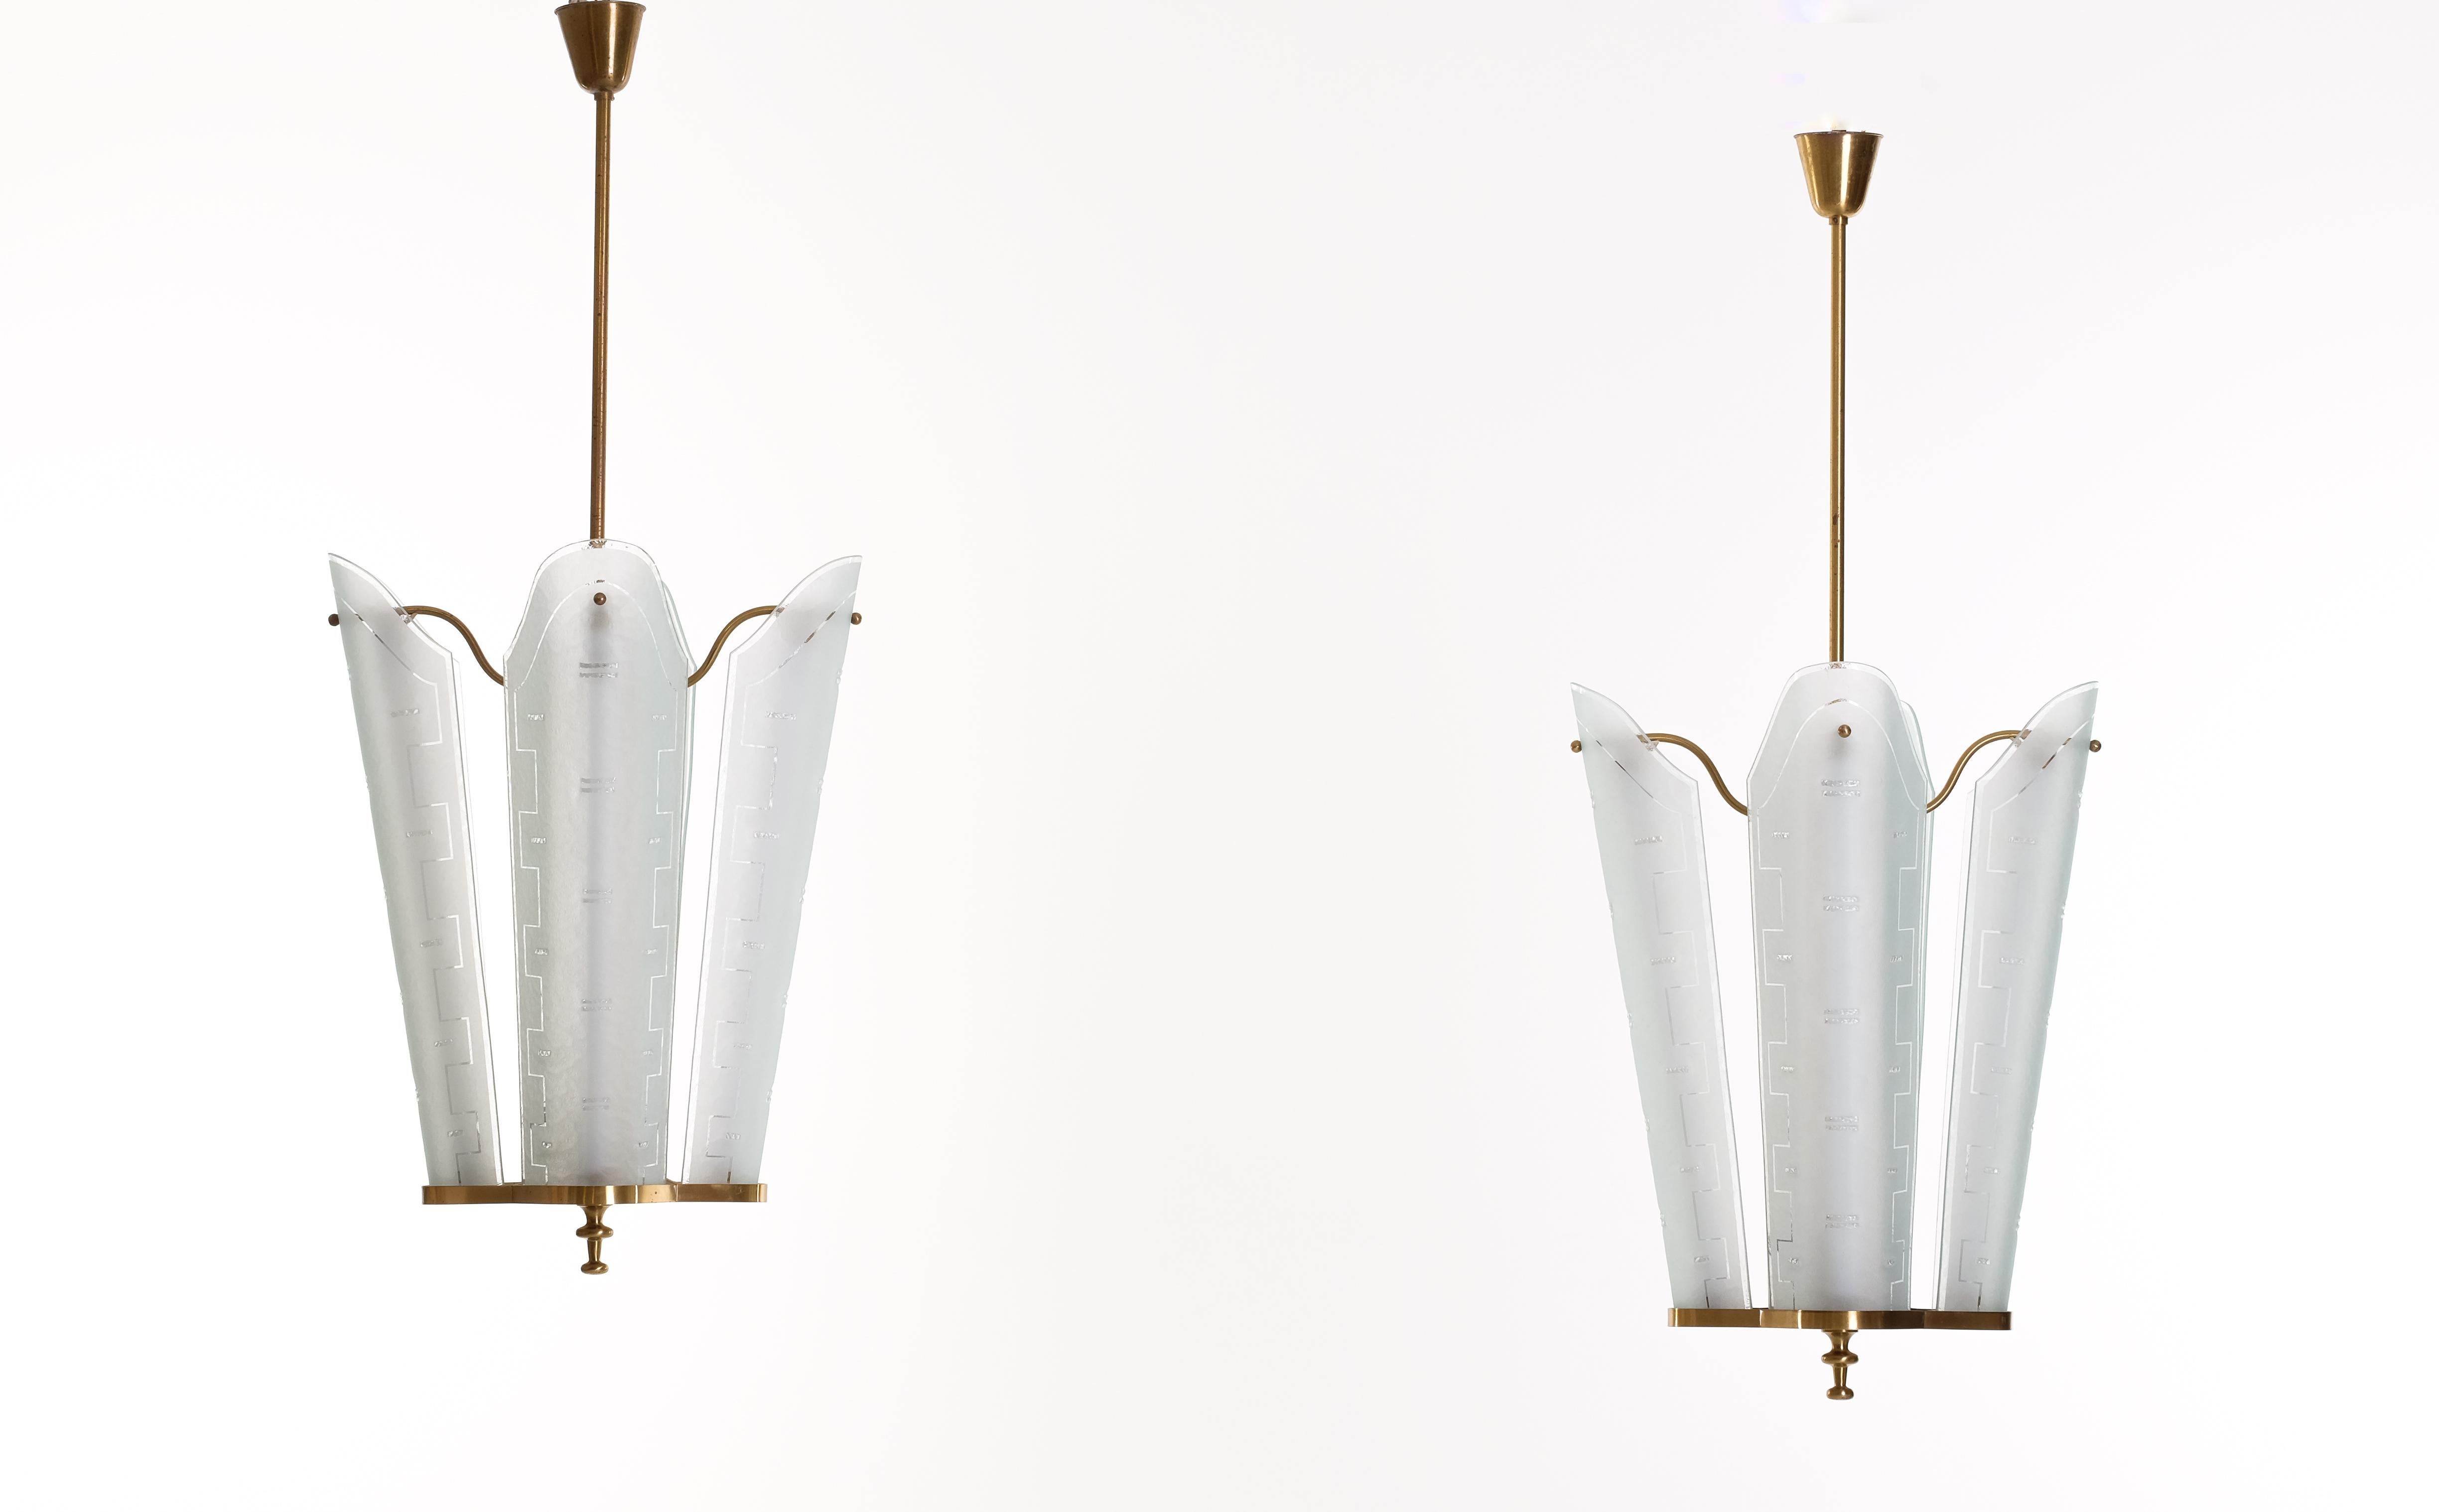 Bo Notini Ceiling Lamps by Glössner, Sweden, 1950s For Sale 1